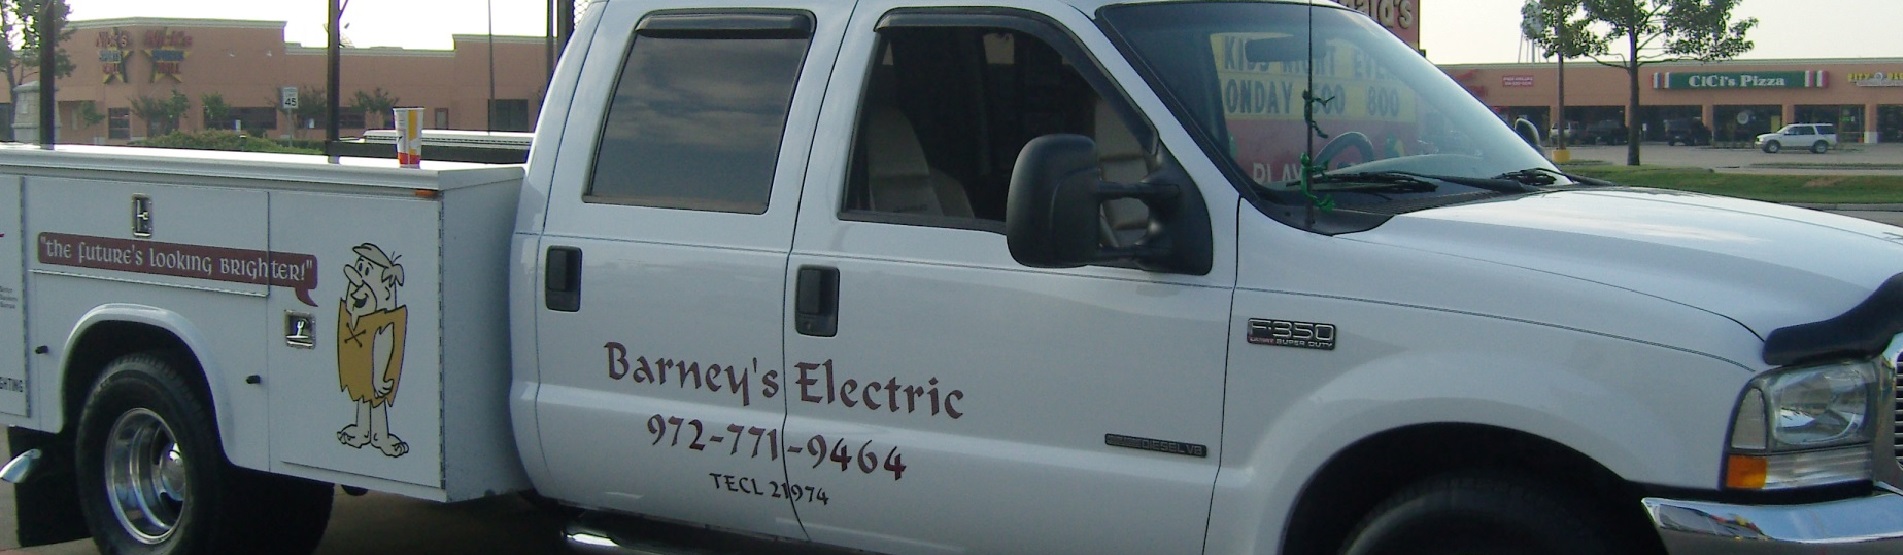 Electrician Dallas TX Barney's Electric Full Service Electrician Residential Commercial Retail and New Construction Wiring Repair Installation Service 24 Hour Emergency Services Master Electrician Rockwall Texas